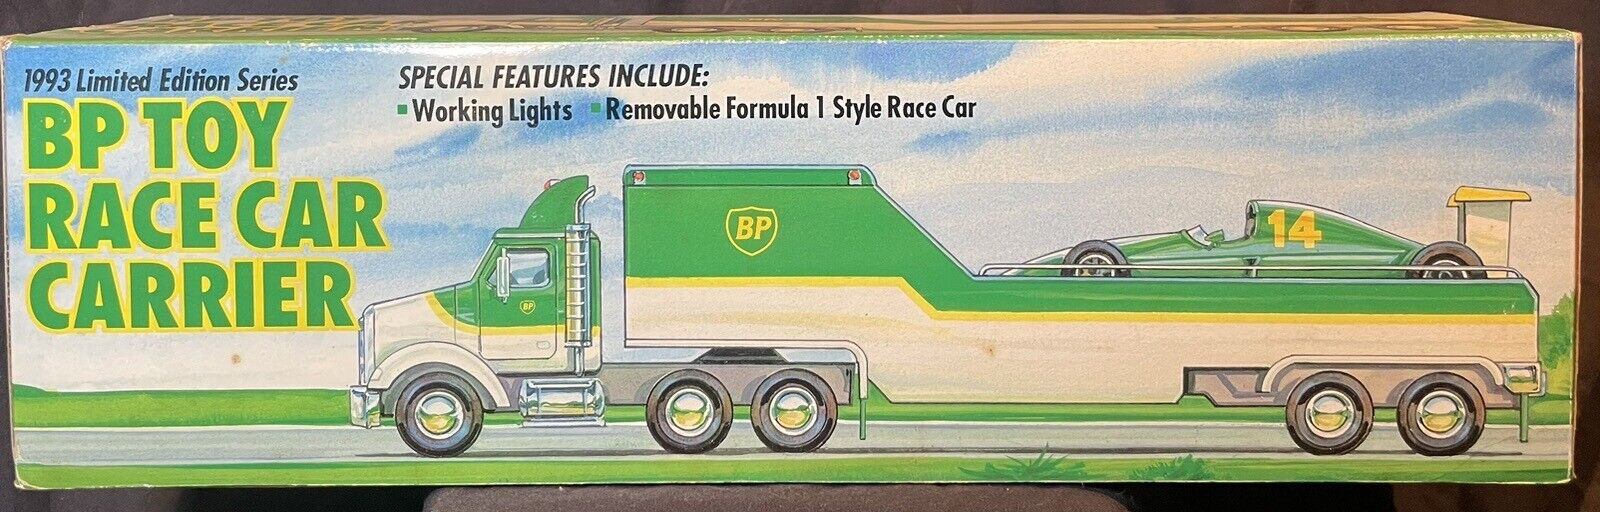 NEW 1993 Vintage BP Toy Race Car Carrier Truck & Indy Racer #14 F1 Formula One